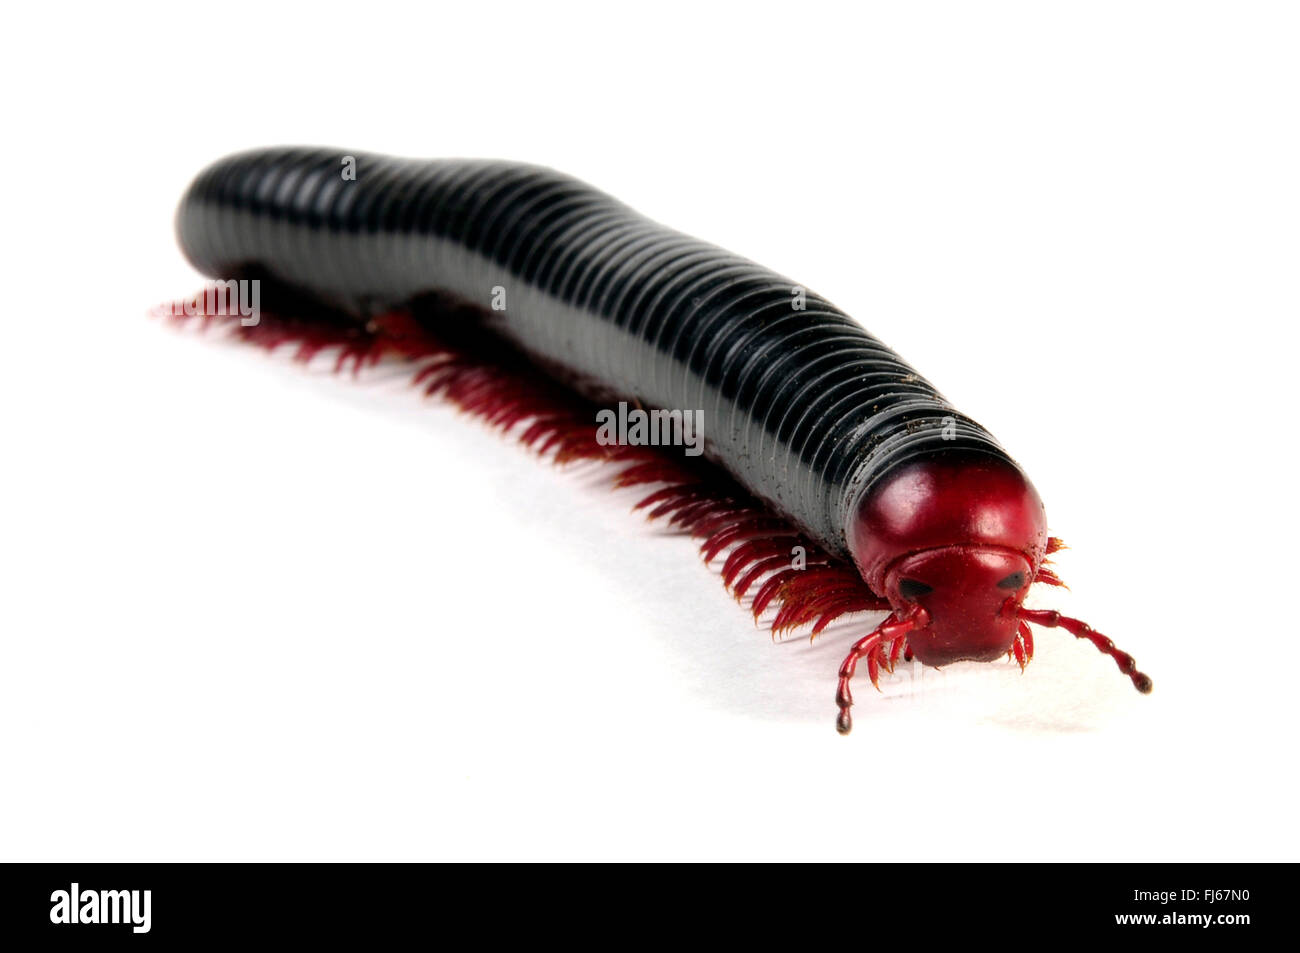 millepede, thousand-legger, myriapodian (Myriapoda), not yet described millepede from South Africa, South Africa Stock Photo